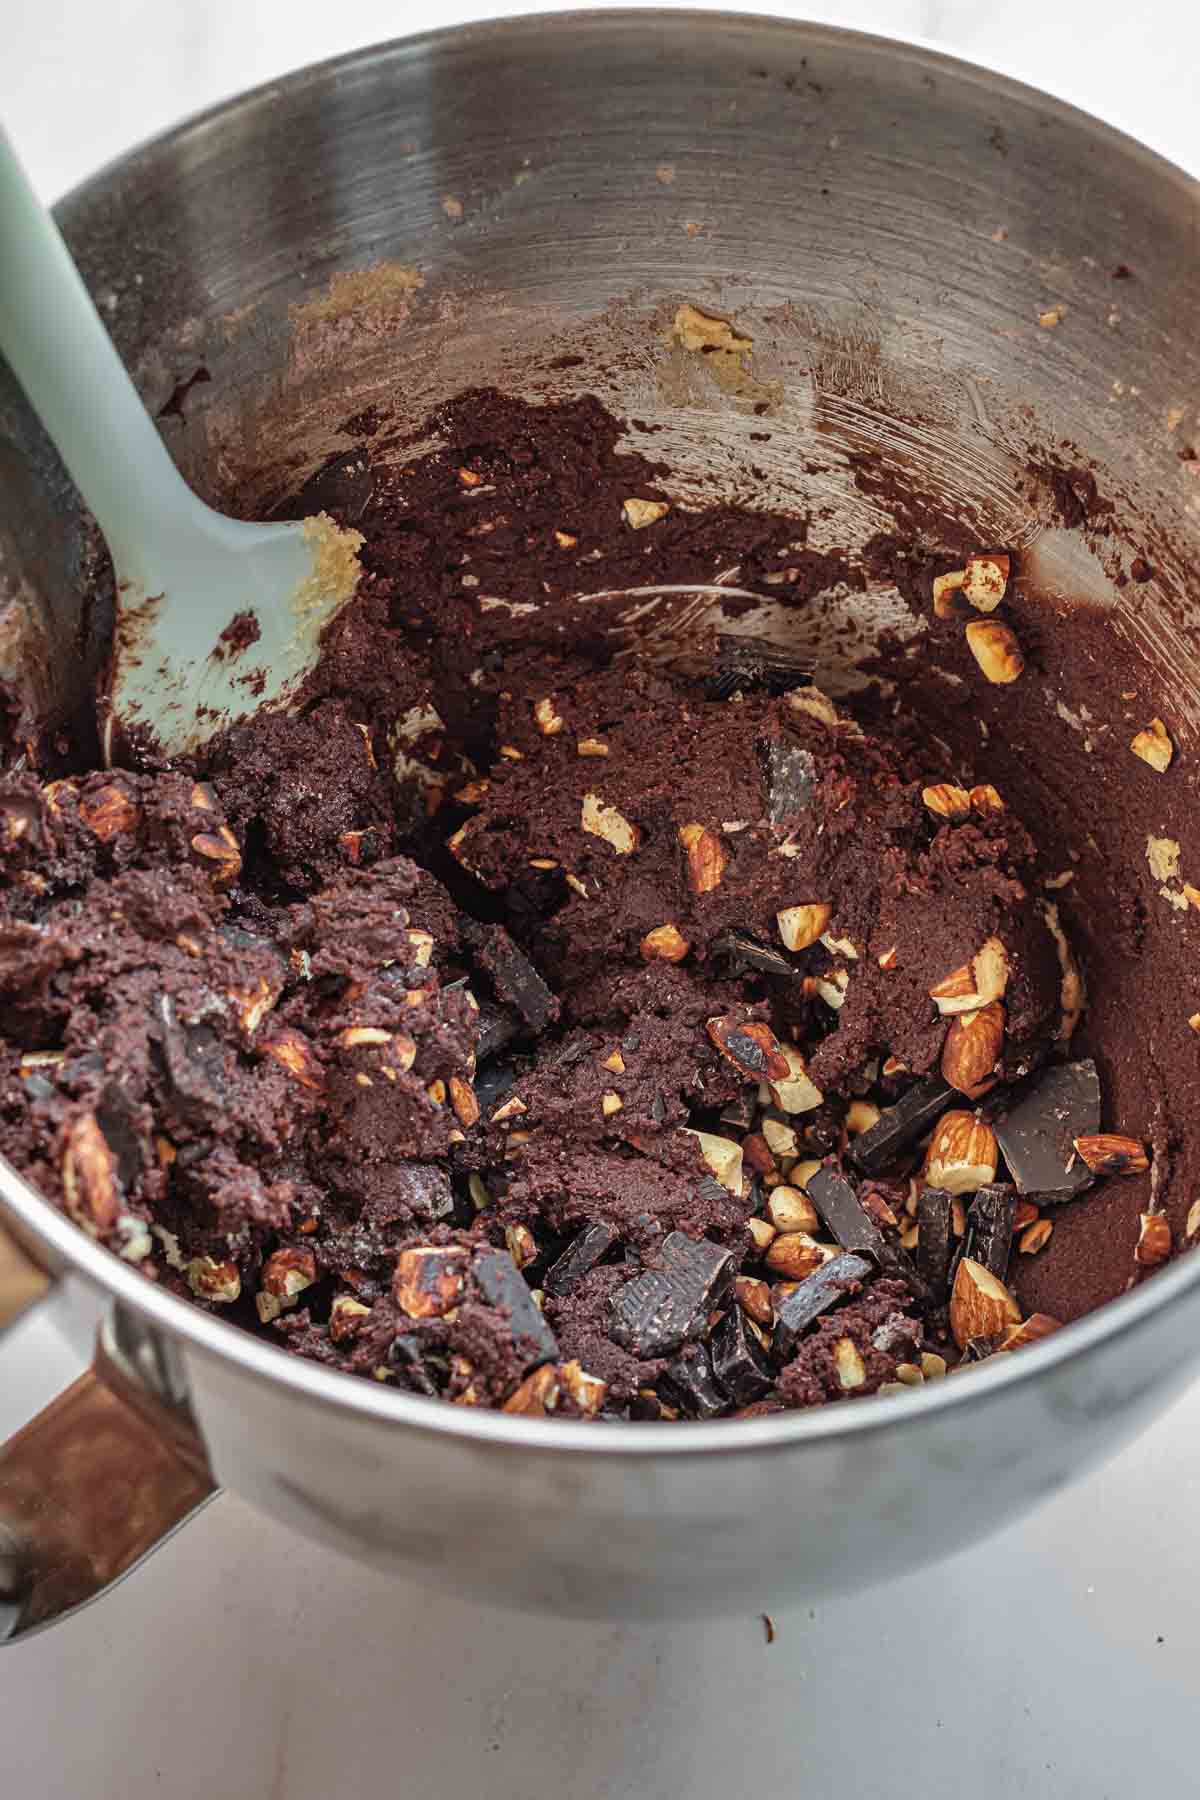 Finished chocolate almond cookie dough in a bowl.